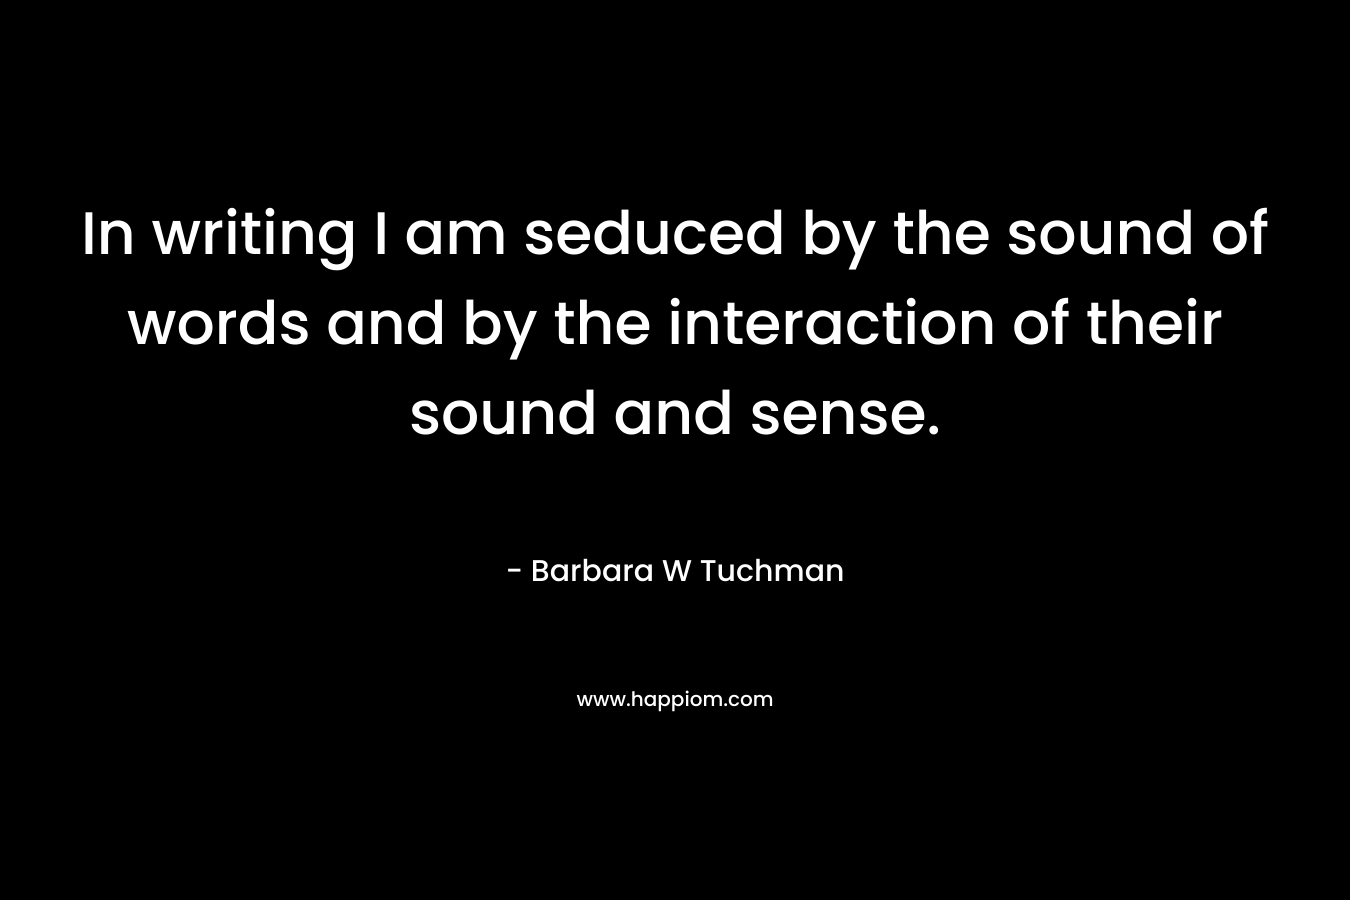 In writing I am seduced by the sound of words and by the interaction of their sound and sense.